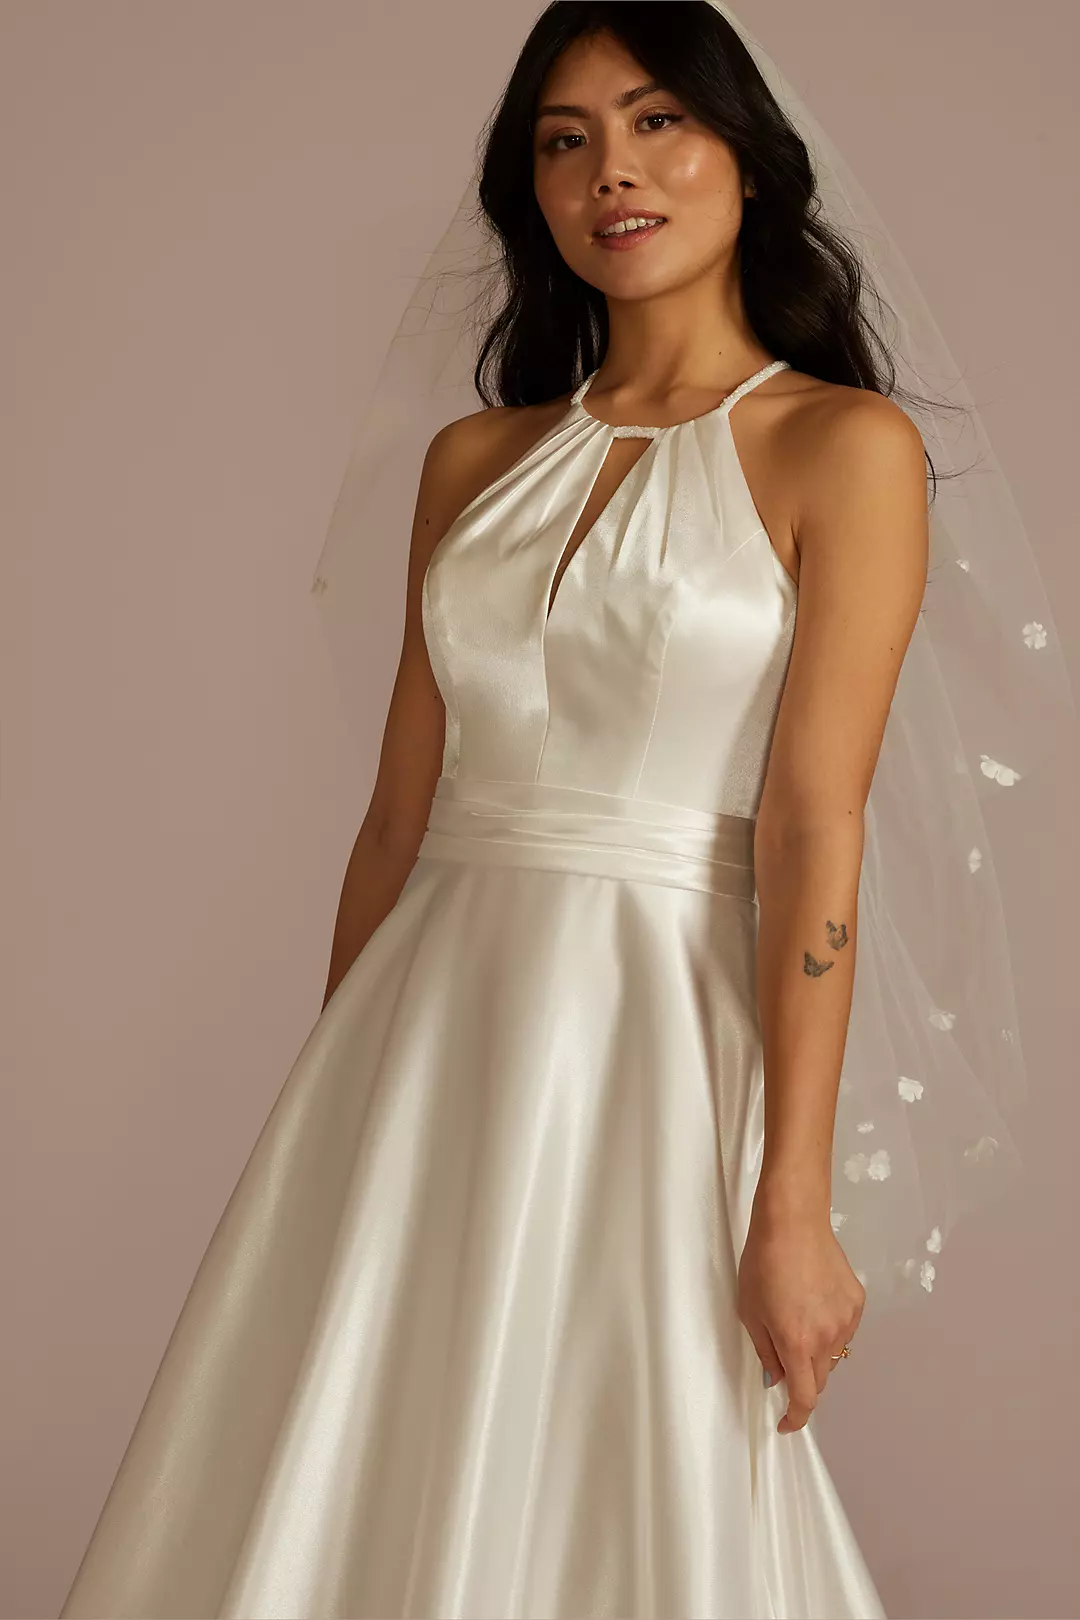 Flower and Pearl Embellished Mid-Length Veil Image